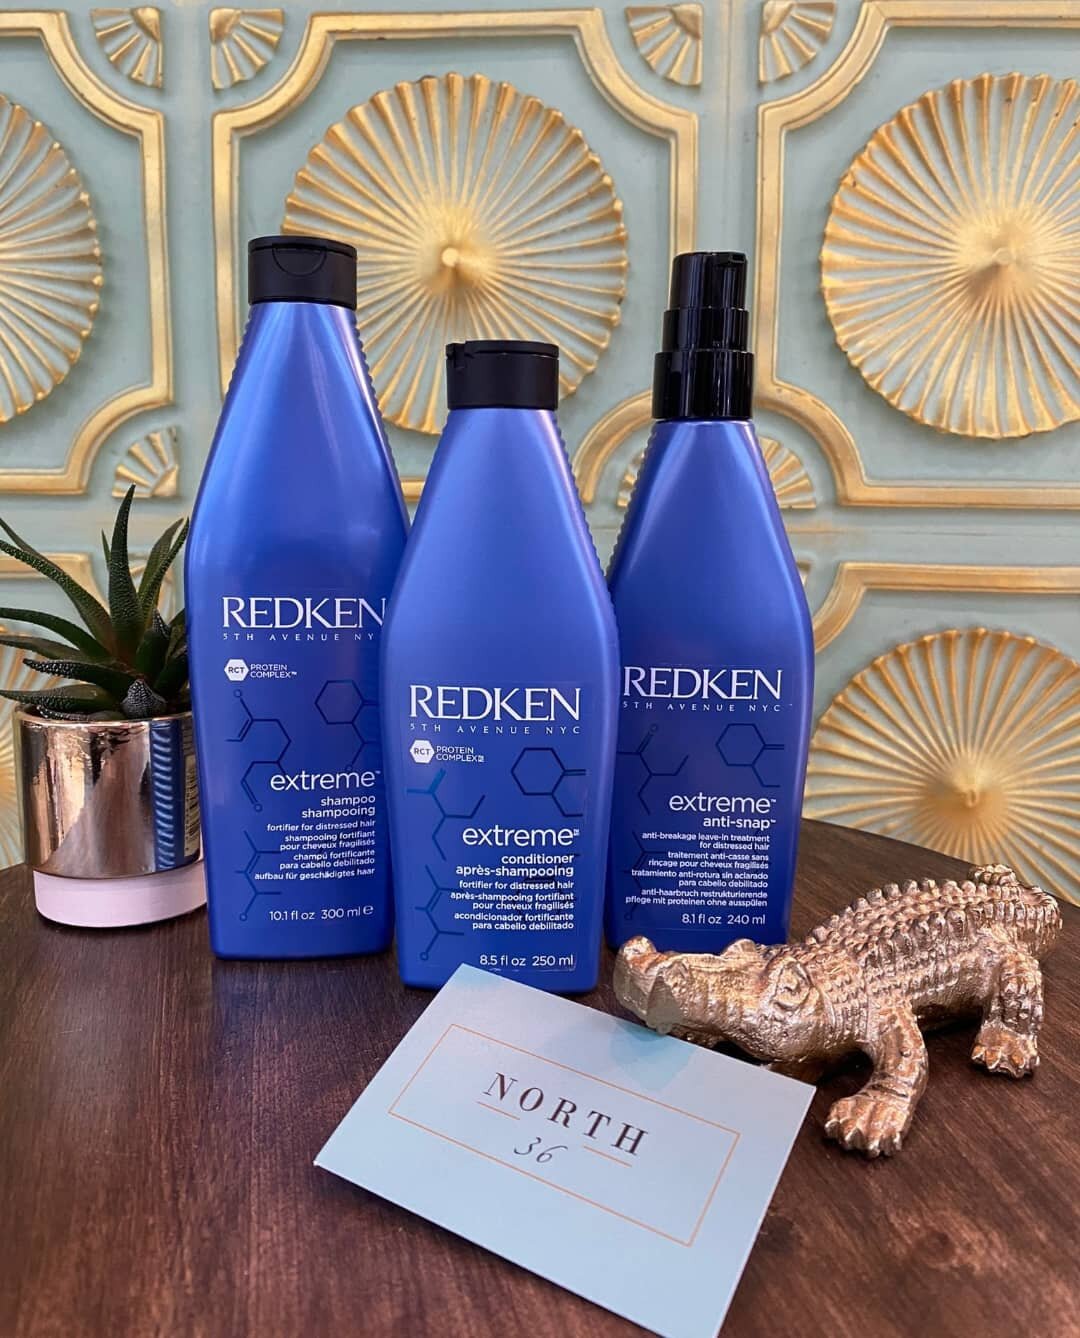 We can't quite believe it ourselves but North 36 is 𝗧𝗪𝗢 𝗬𝗘𝗔𝗥𝗦 𝗢𝗟𝗗 𝗧𝗢𝗗𝗔𝗬!

To celebrate we're giving away one of our miraculous Redken Extreme Protein Packs 🌿

The Redken Extreme Pack helps to strengthen and fortify any weakened areas